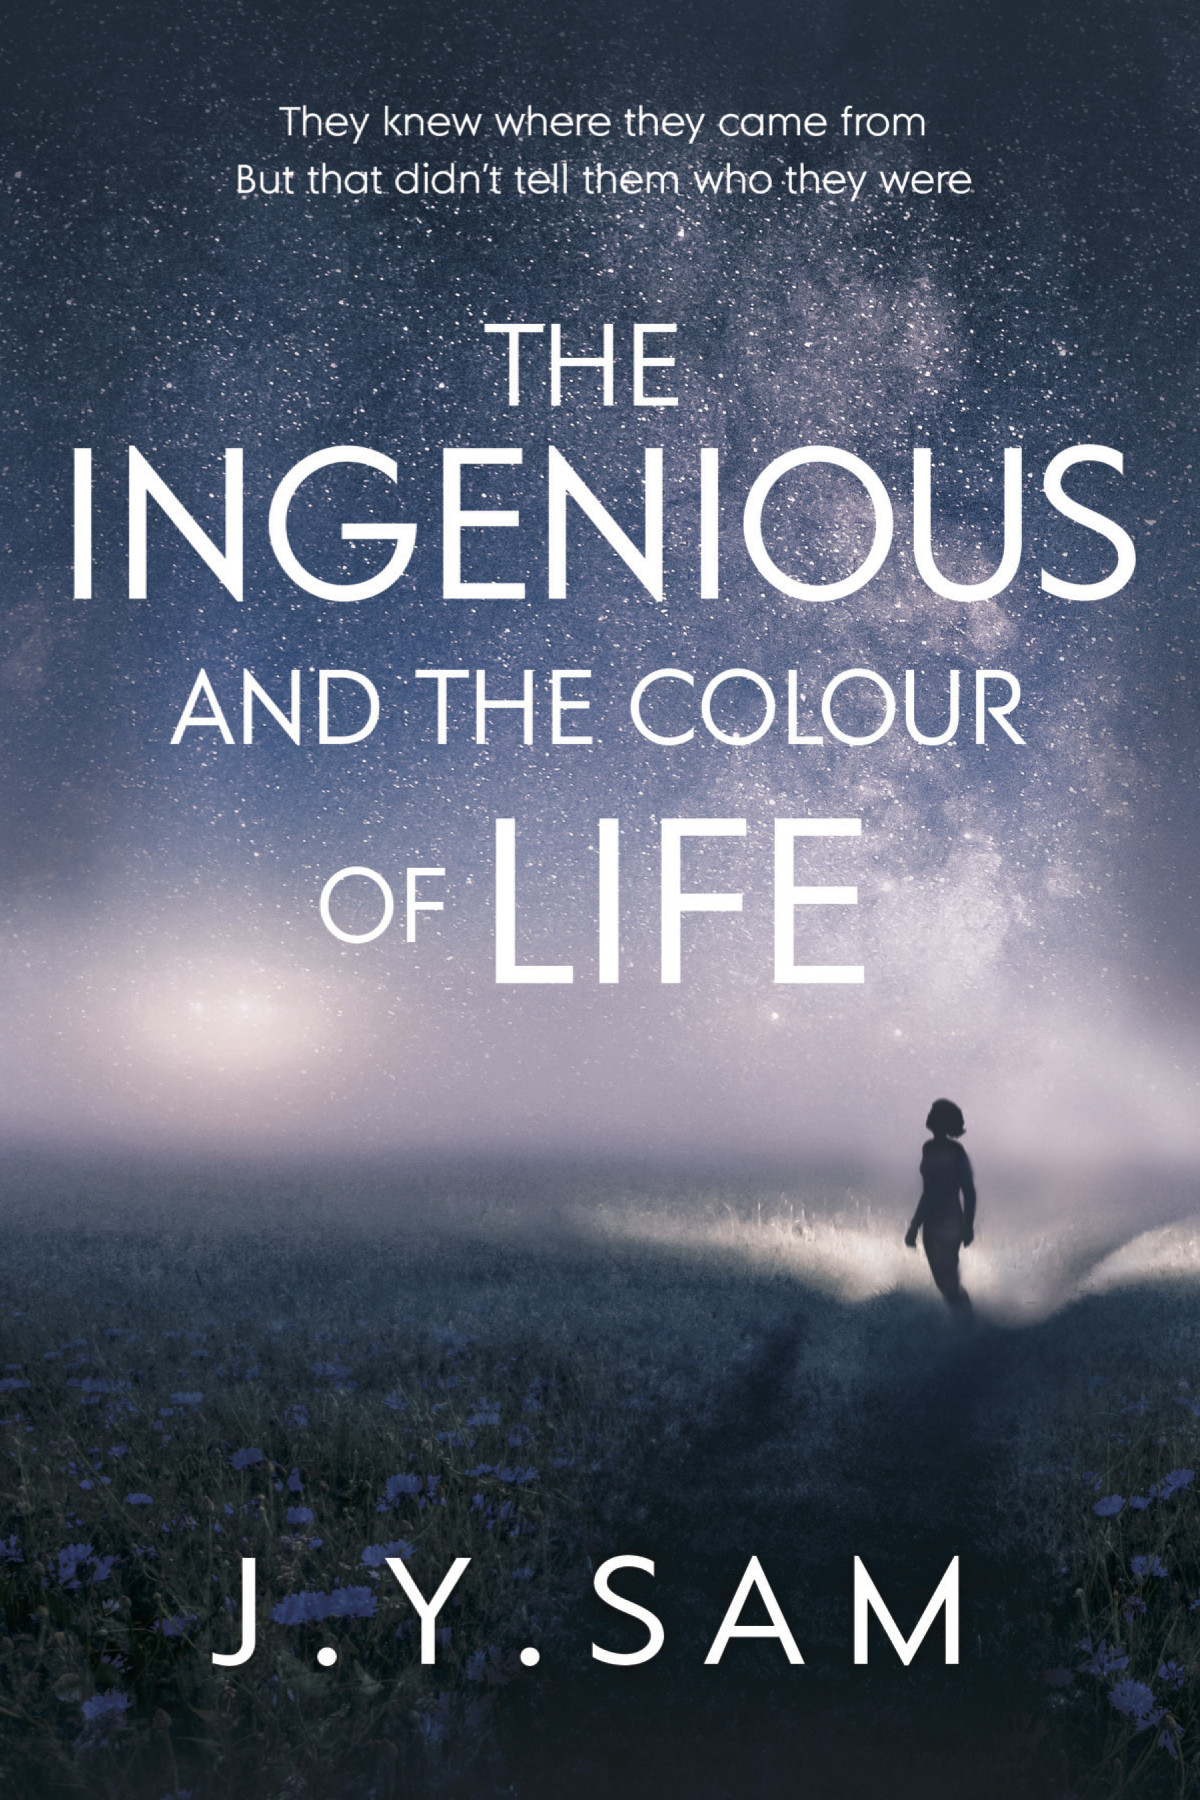 The Ingenious and the Colour of Life